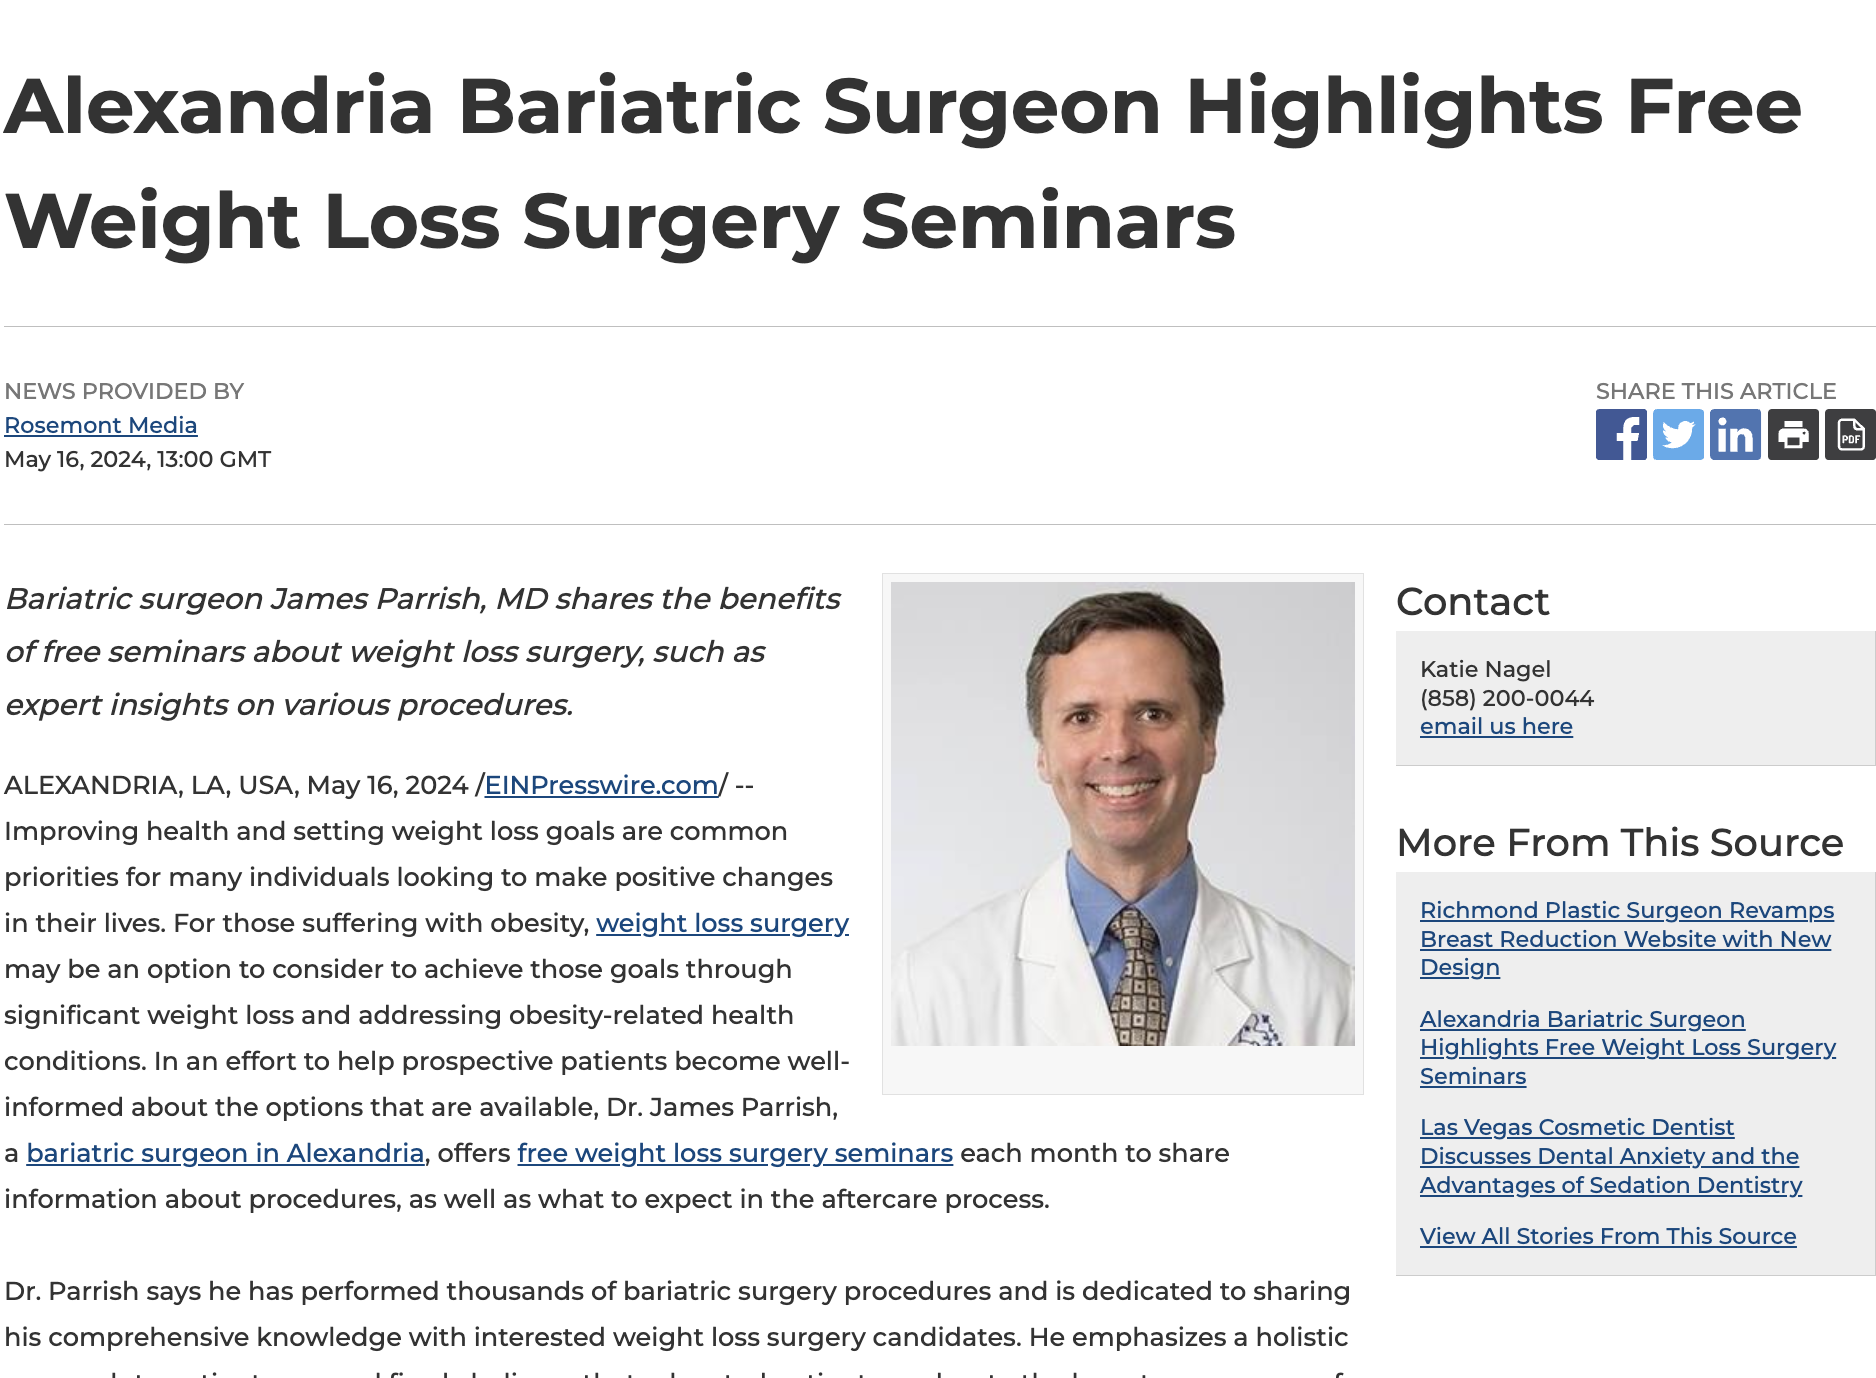 Alexandria bariatric surgeon shares the benefits of free informational seminars about weight loss surgery.